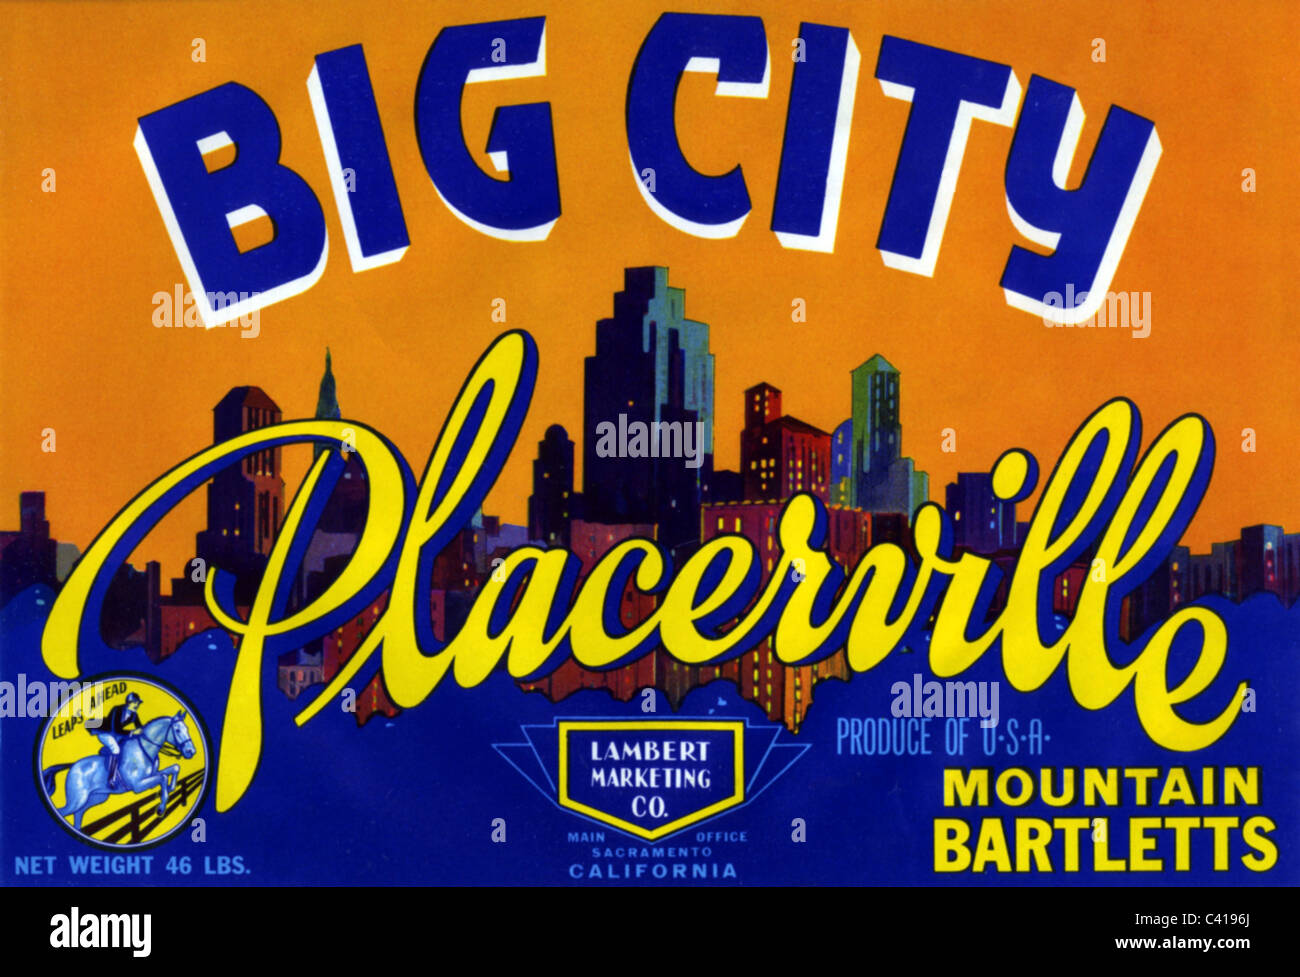 advertising, food, Big City Placerville, Mountain Bartletts, 1920s, Additional-Rights-Clearences-Not Available Stock Photo